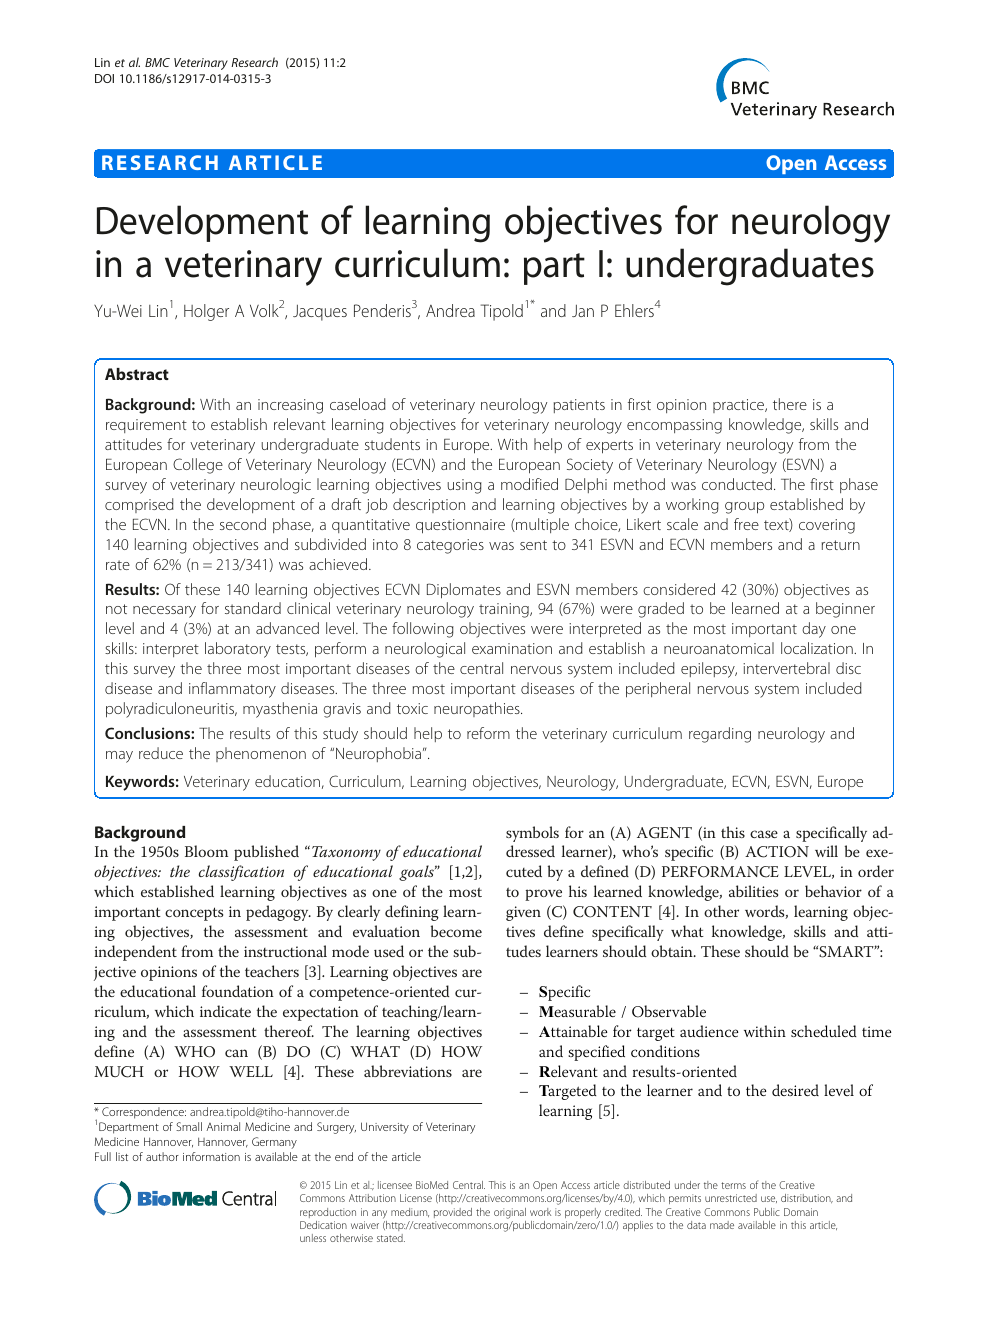 Development of learning objectives for neurology in a veterinary  curriculum: part I: undergraduates – topic of research paper in Veterinary  science. Download scholarly article PDF and read for free on CyberLeninka  open